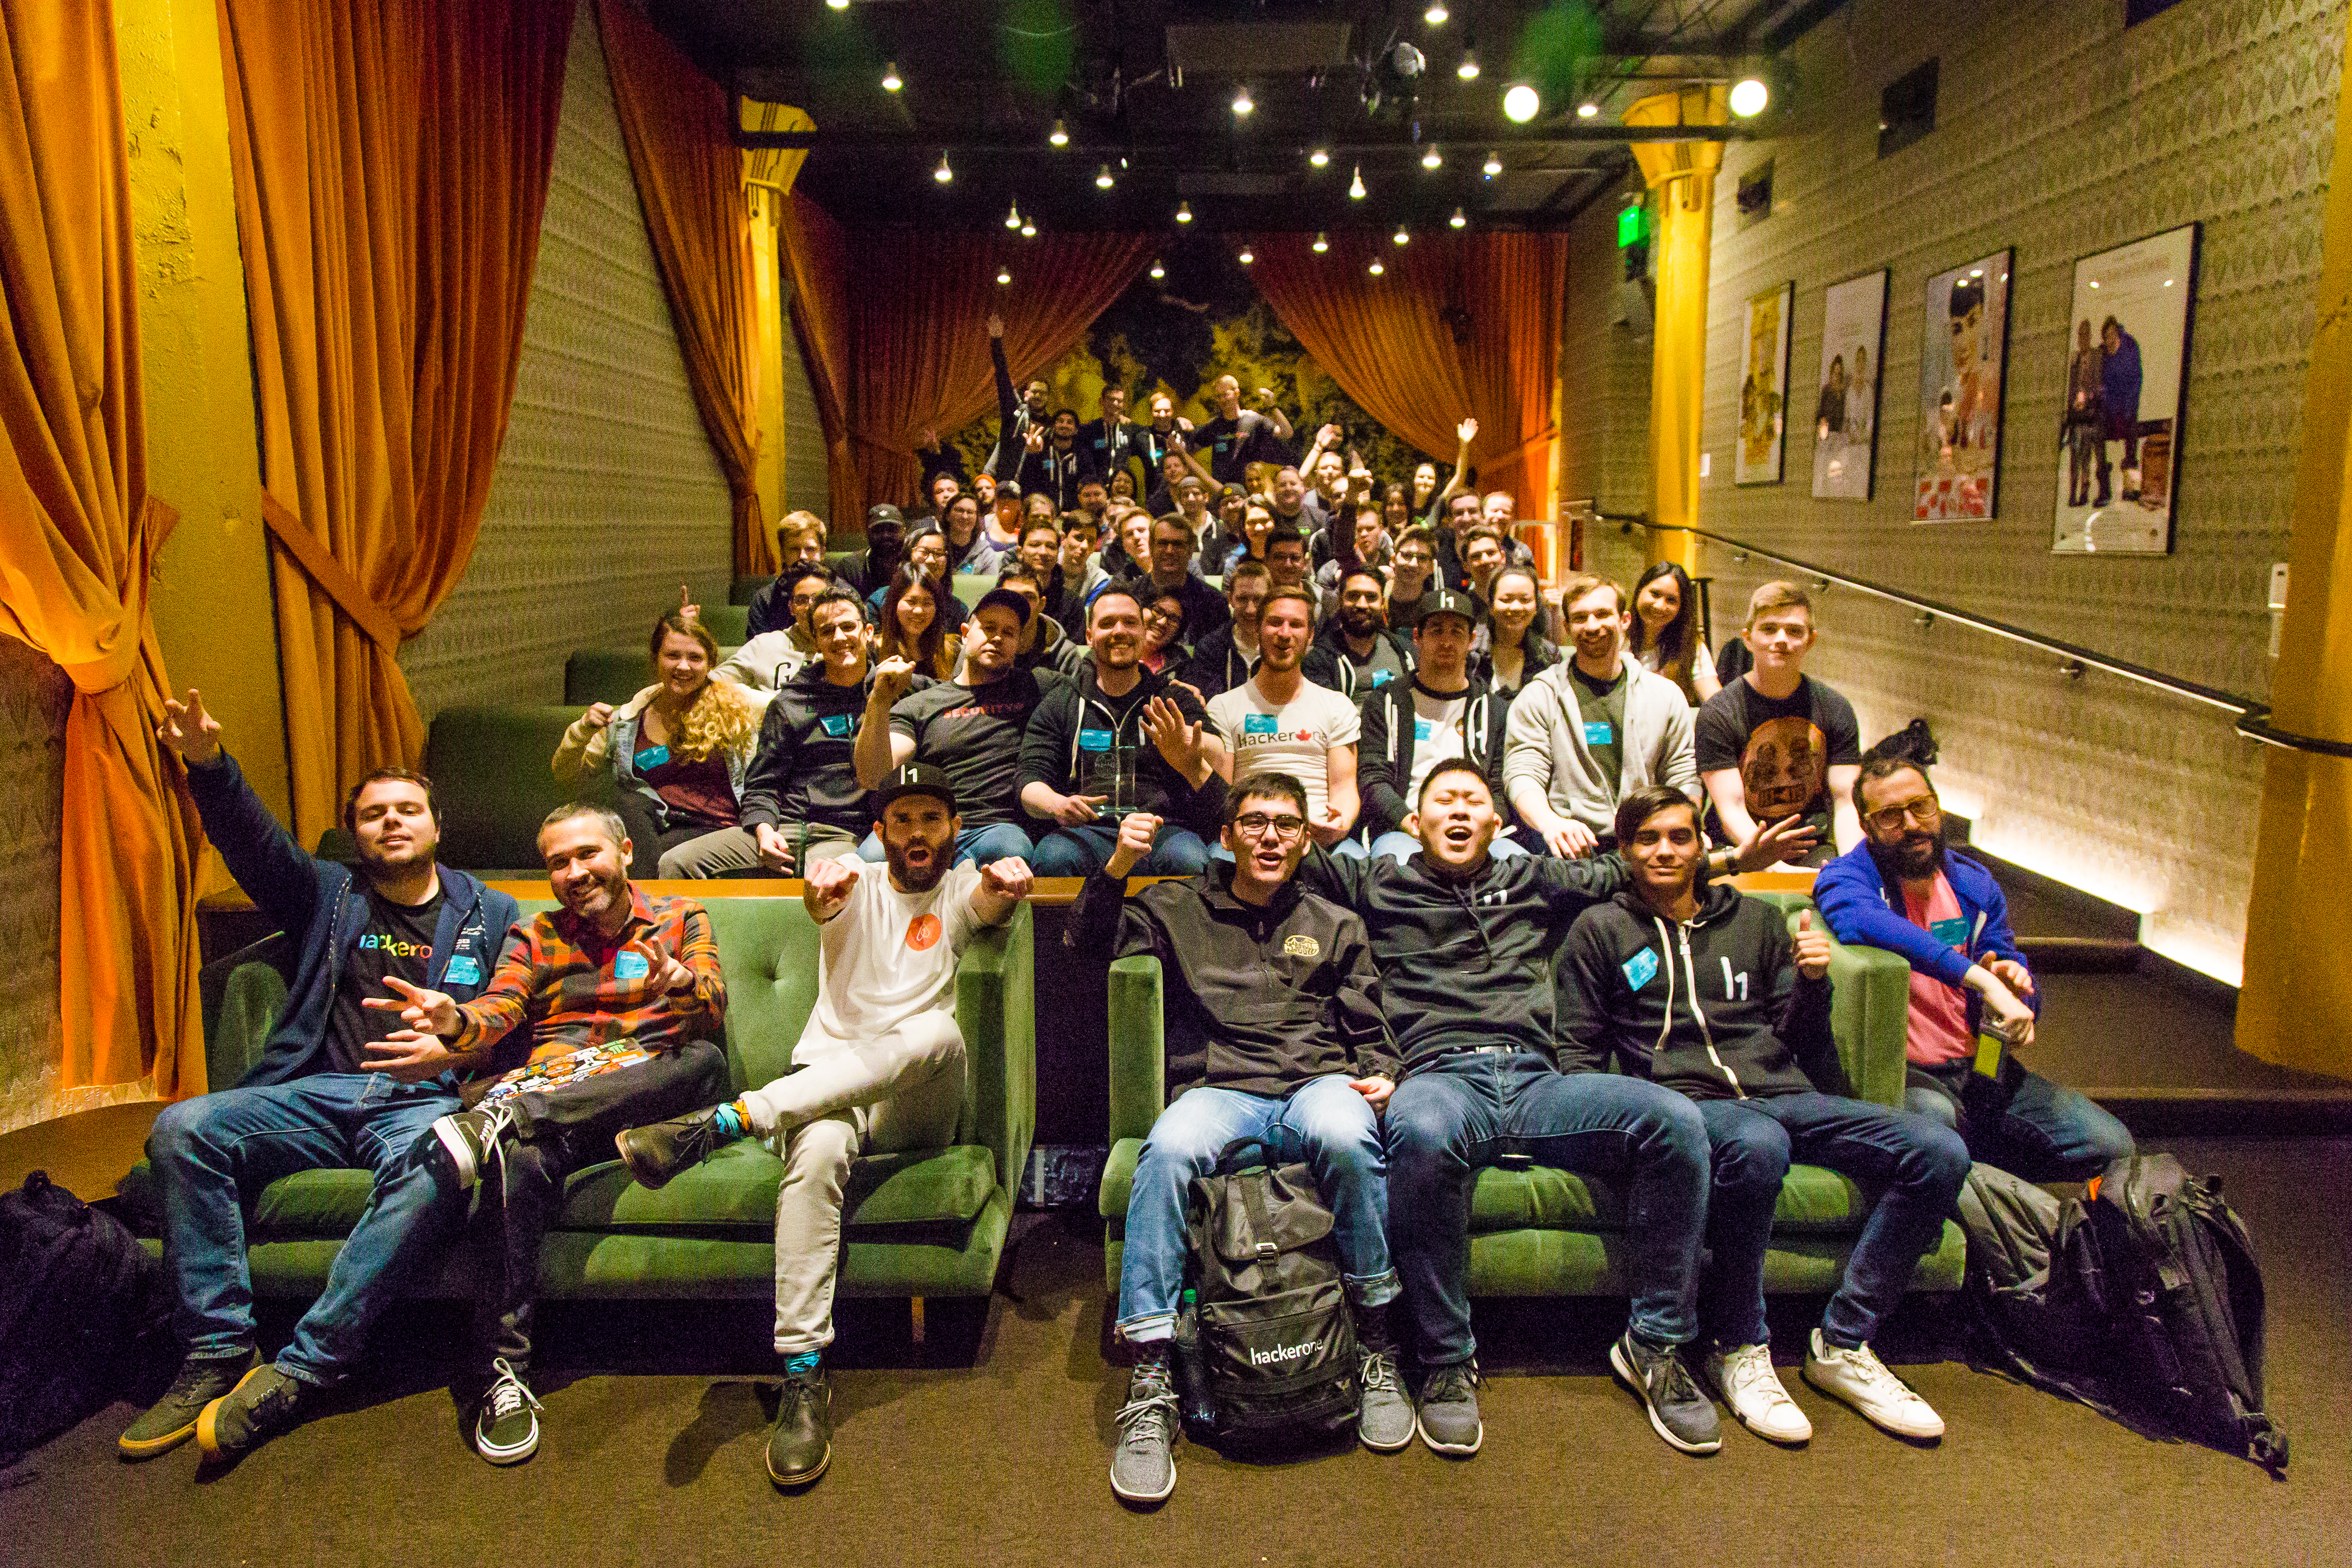 Attendees pose for a photo in Airbnb’s amazing theatre at the end of day 1 of h1-415